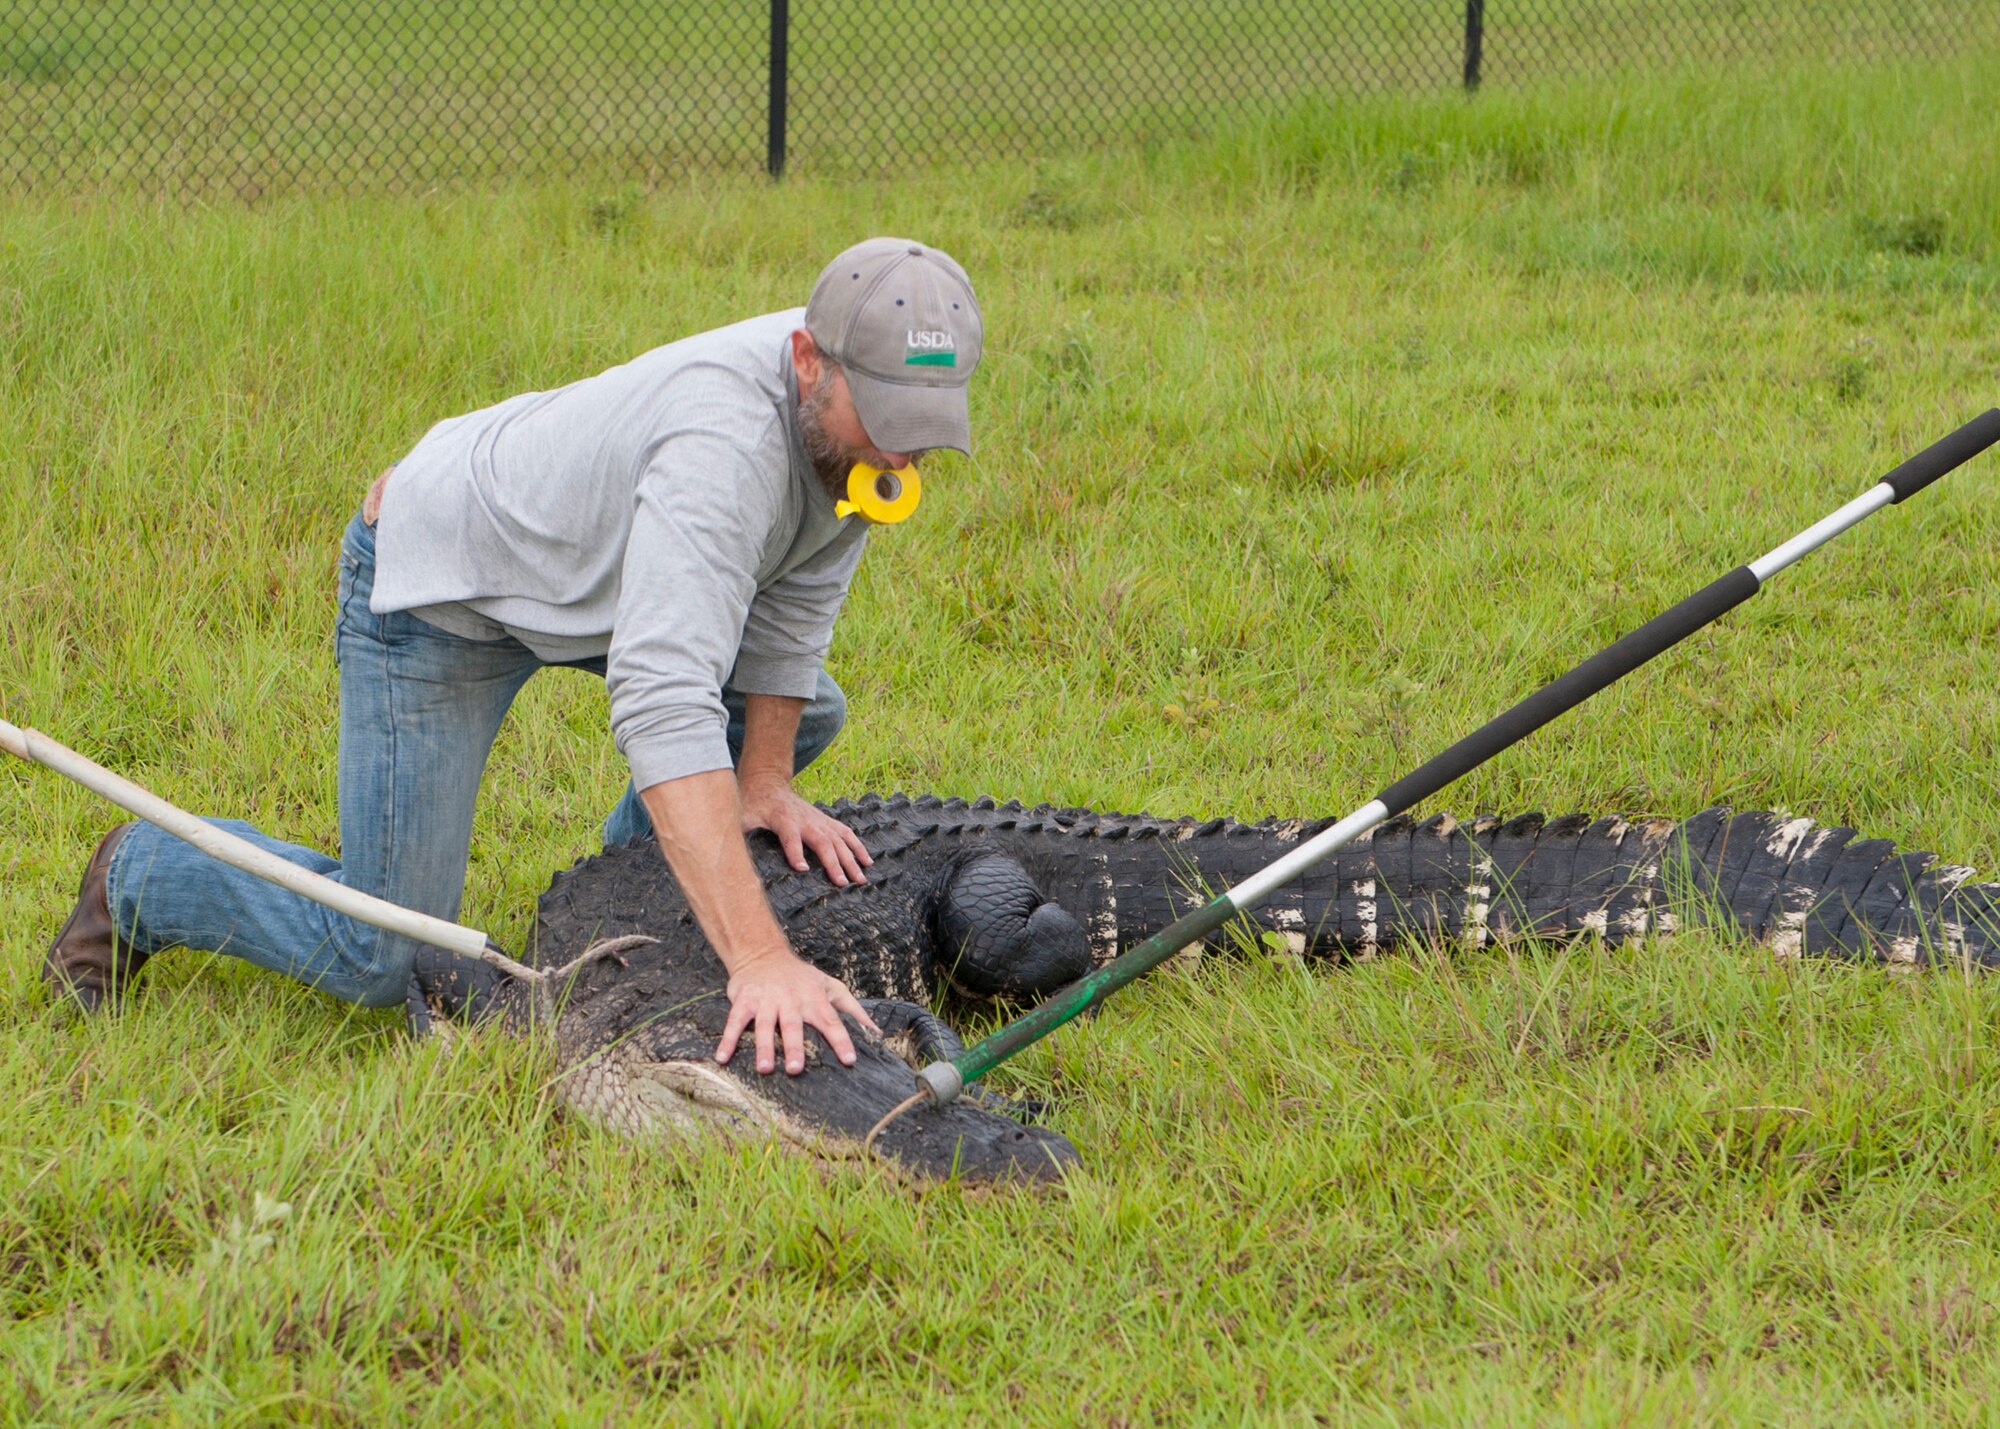 J.C. Griffin, a U.S. Department of Agriculture wildlife biologist, pounces on a 10 ½-foot alligator to trap and relocate the large reptile at Moody Air Force Base, Ga., July 25, 2013. Alligators and other wildlife are hazardous to not only humans, but to aircraft on the runway. (U.S. Air Force photo by Senior Airman Eileen Meier/Released)